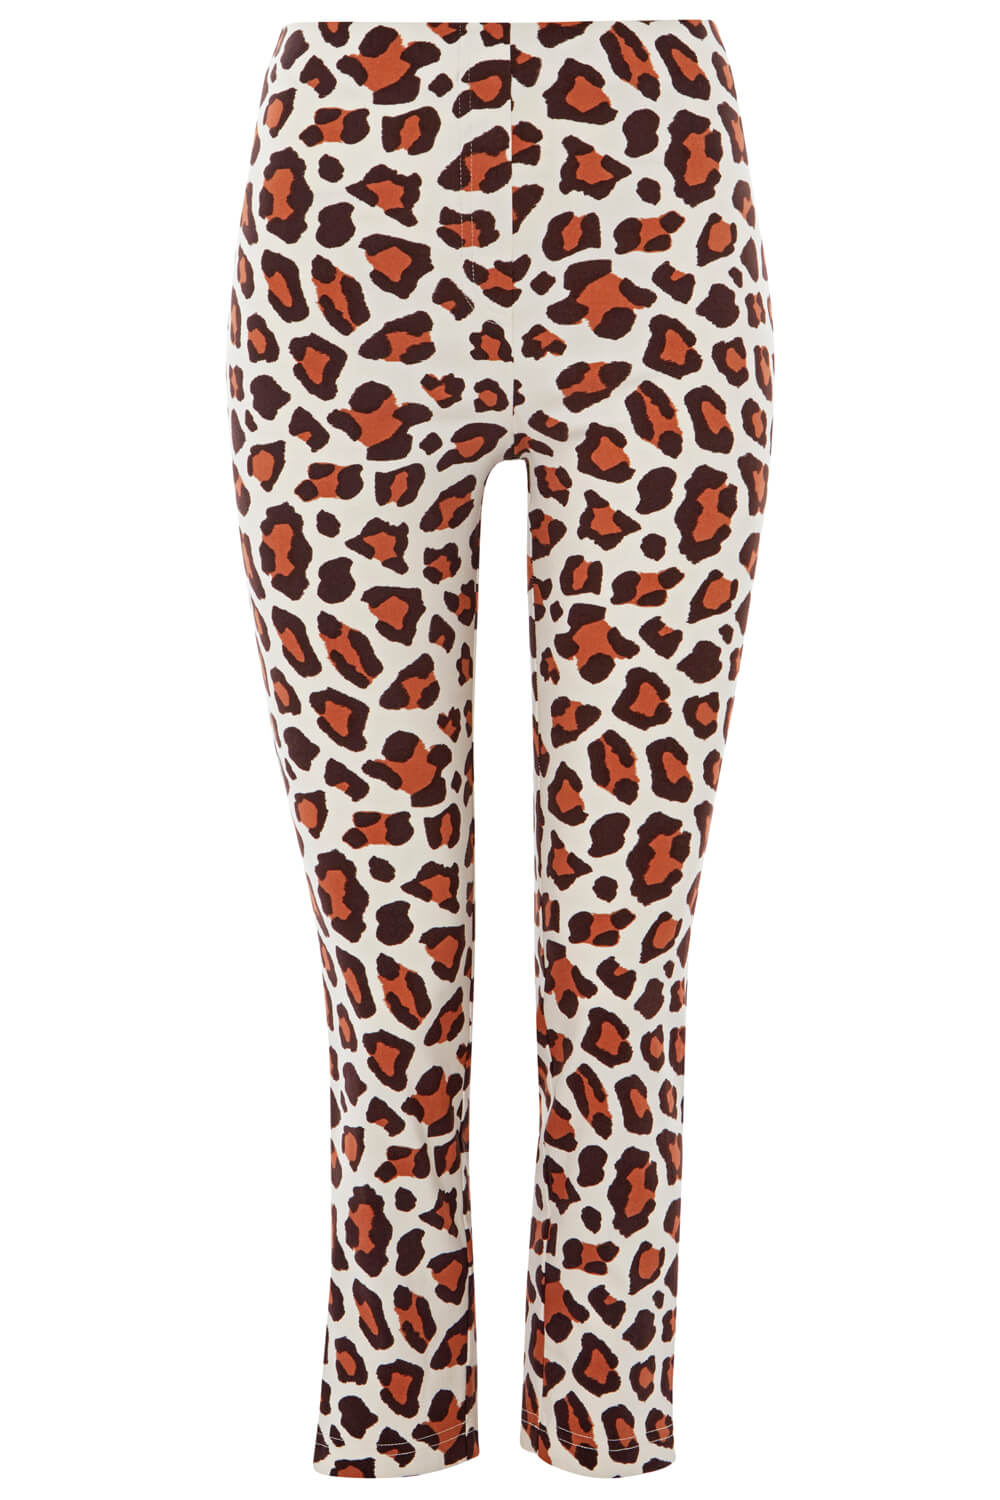 Tan Animal Print 3/4 Length Stretch Trousers , Image 4 of 4